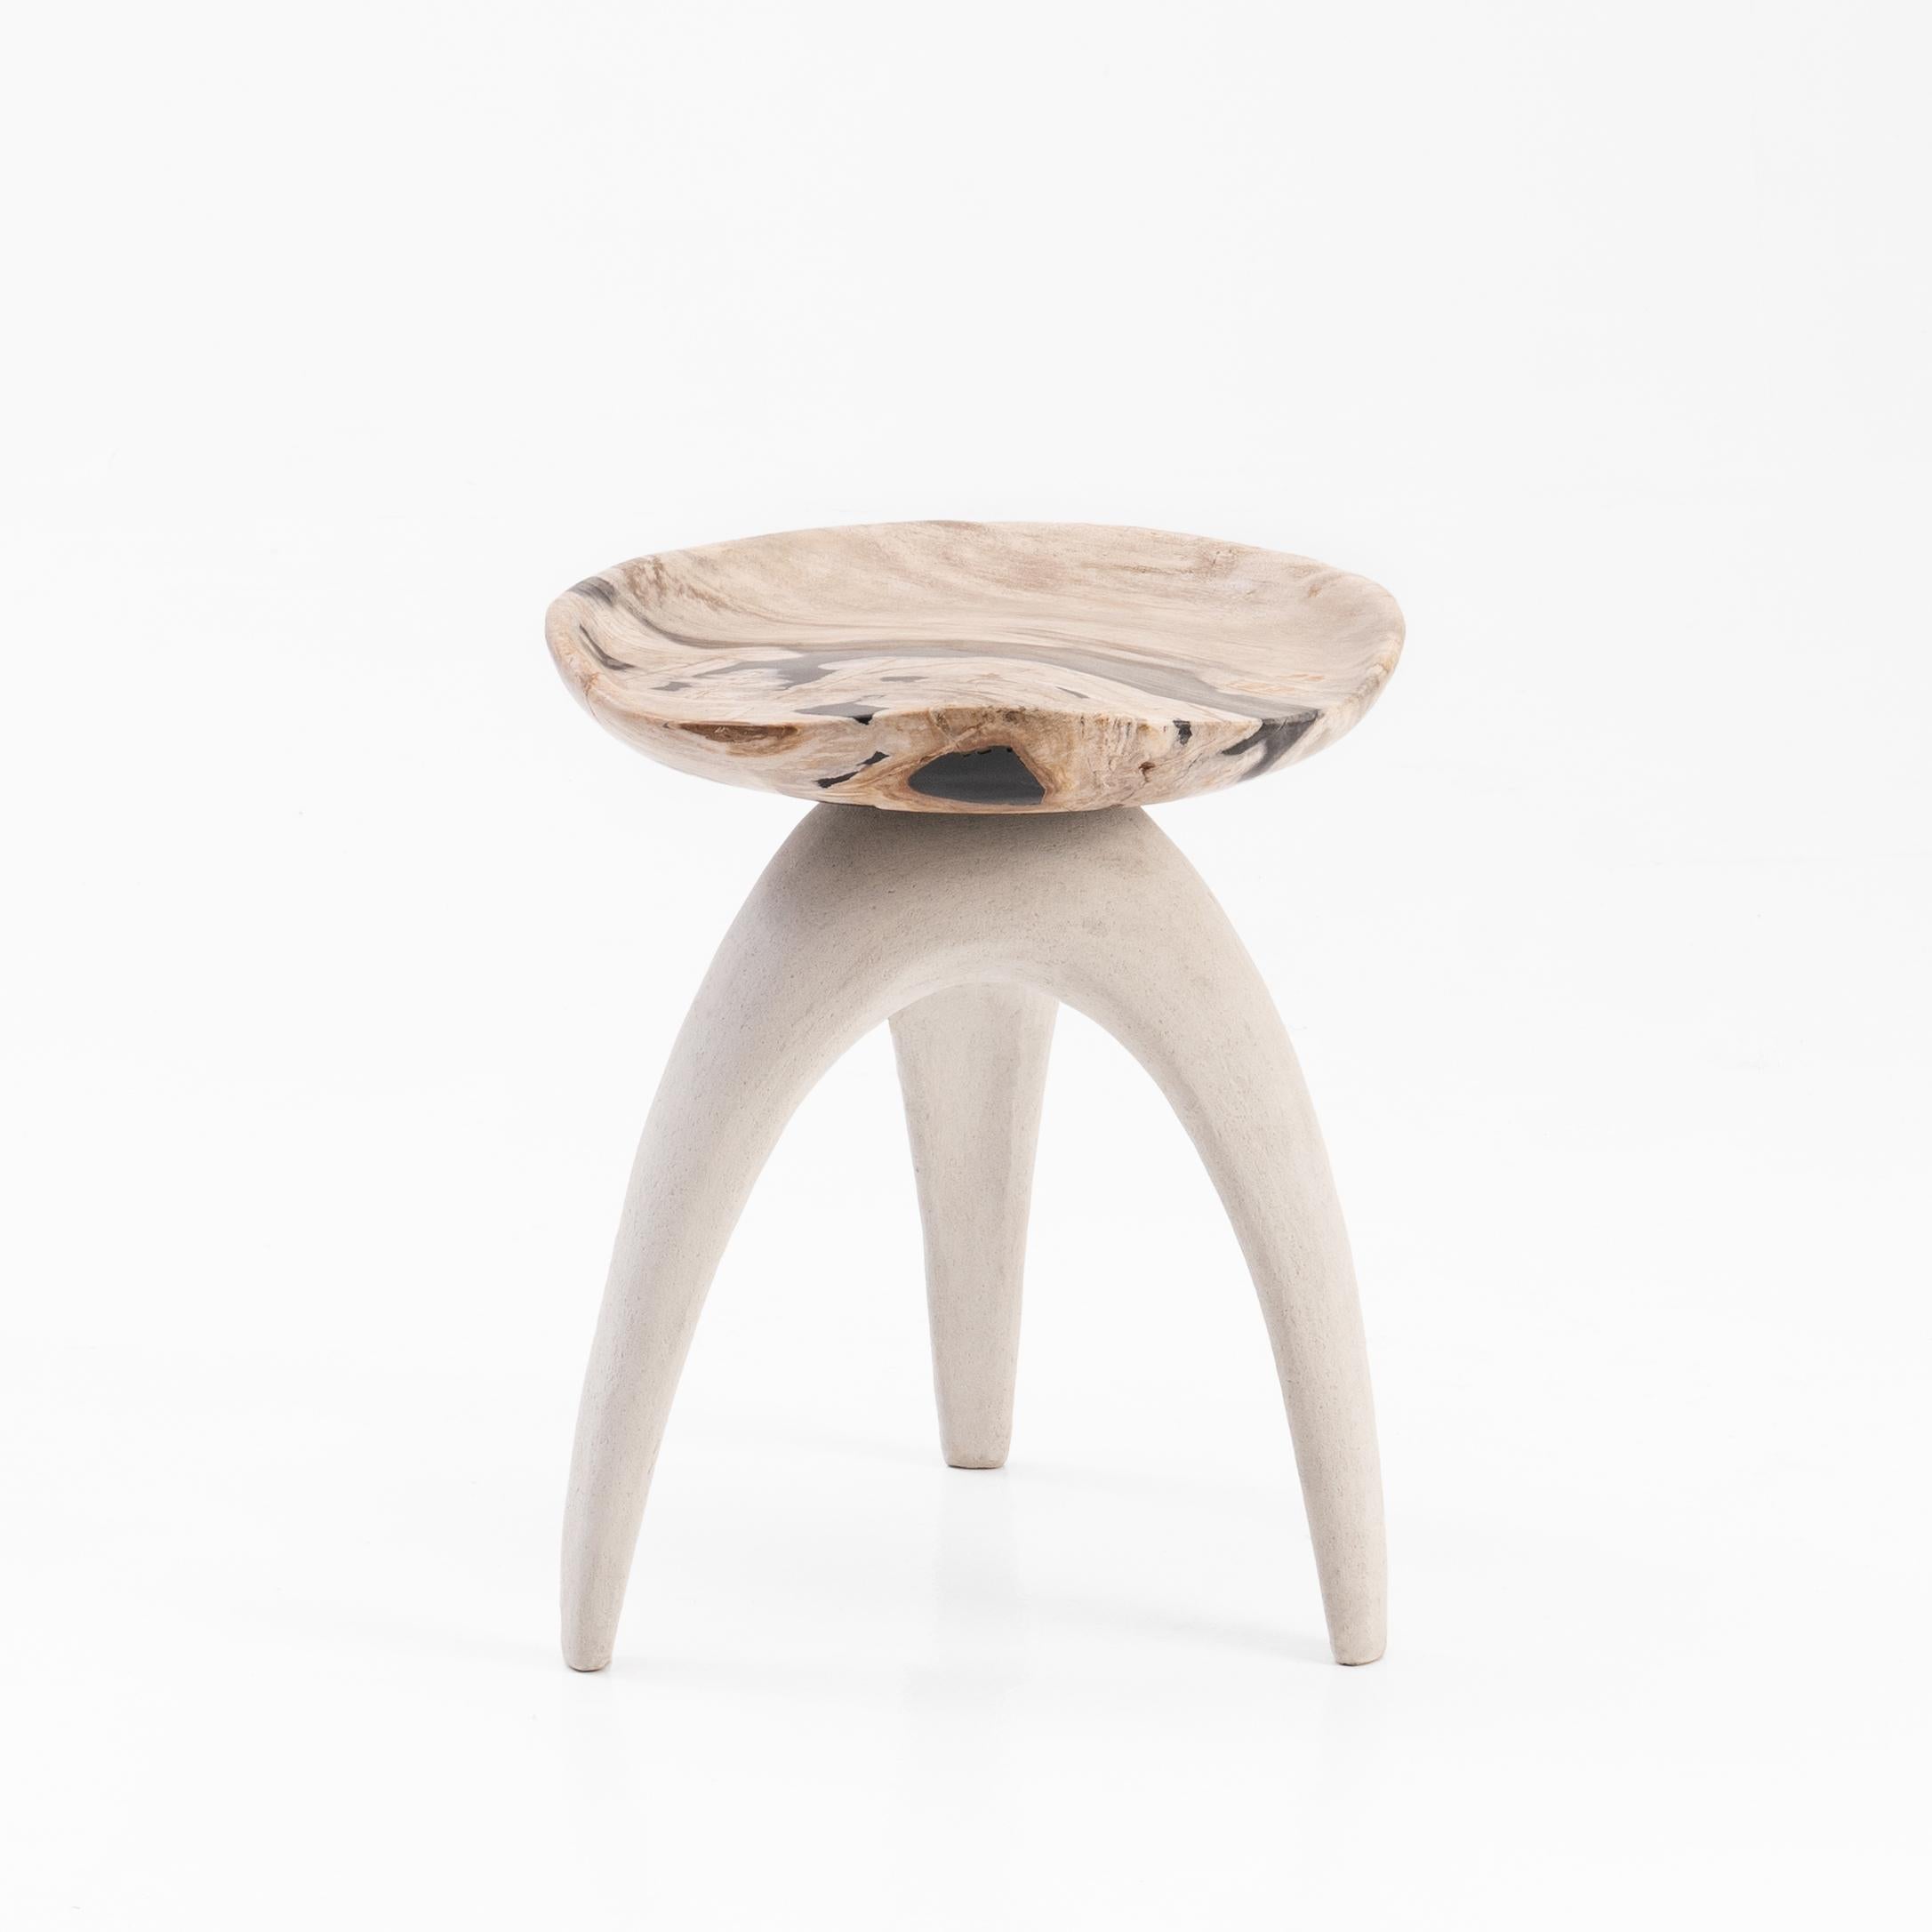 The ‘Bermuda Triangle’ sculptural stool features a solid hand-carved petrified wood saddle seat, perched upon an organic shaped tripod base made from limestone composite.
 
Petrified wood is created from fossilised trees transformed into stone by a